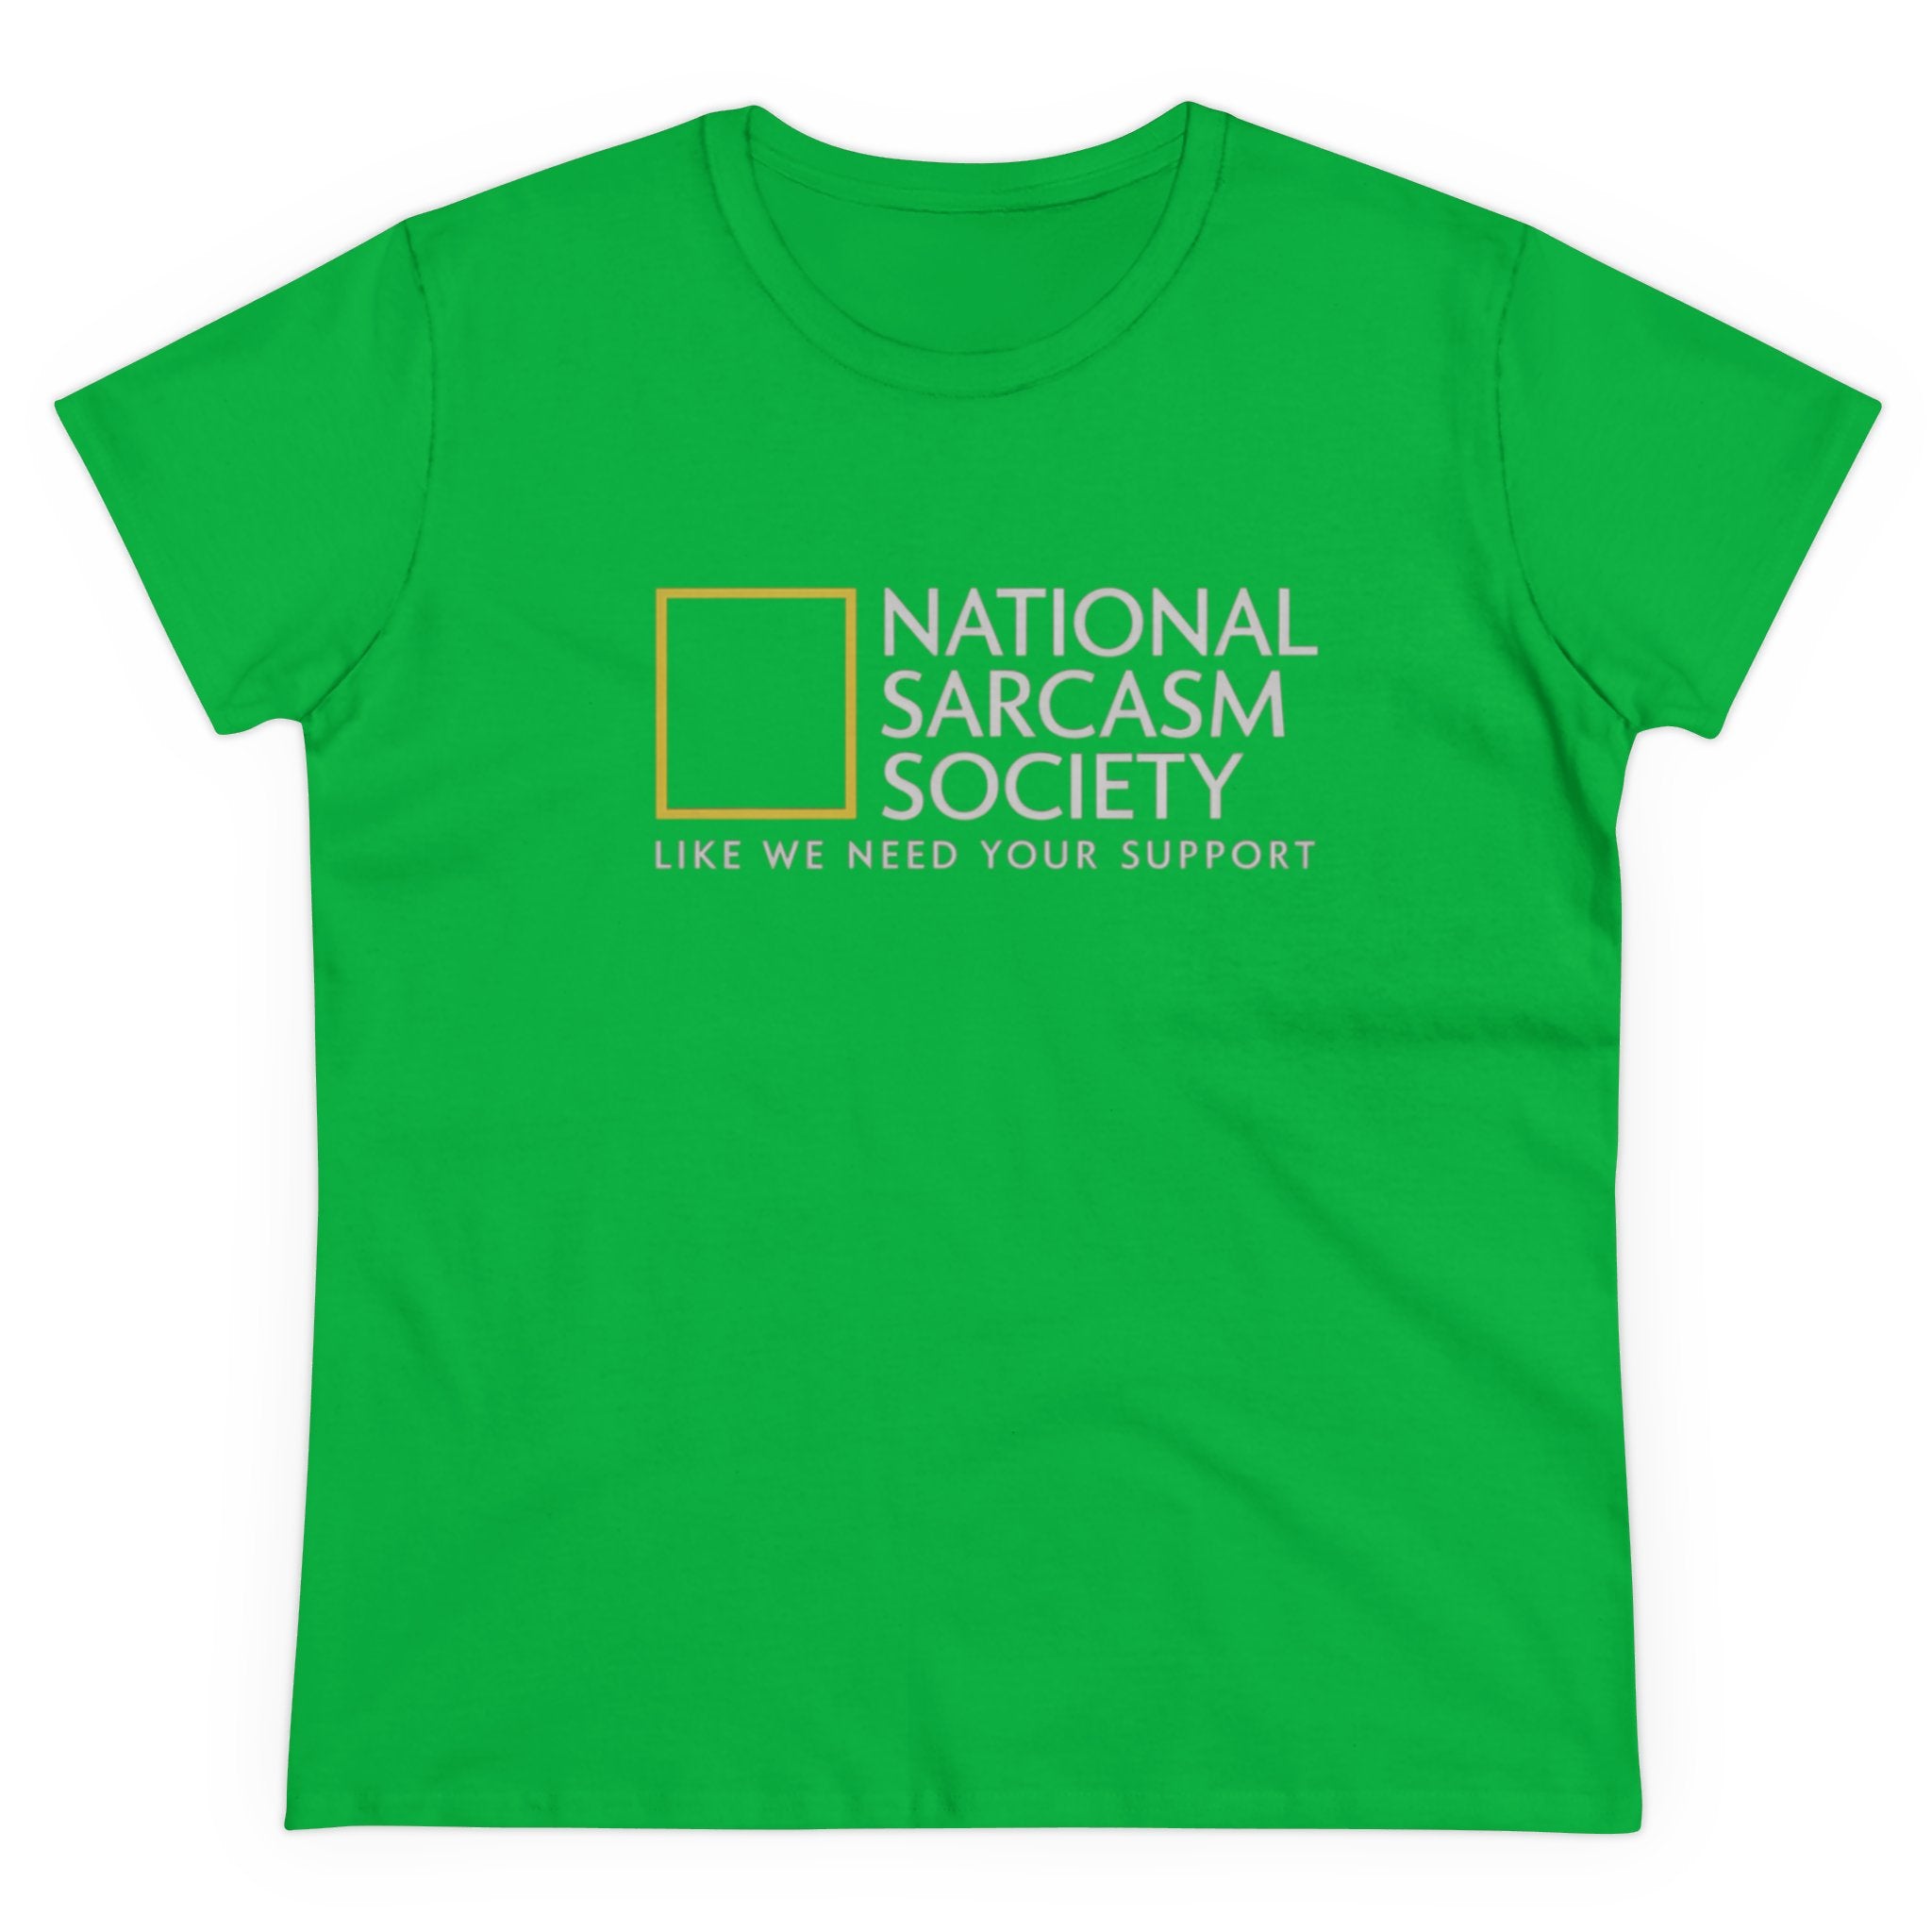 A green semi-fitted National Sarcasm Society - Women's Tee with the text "National Sarcasm Society: Like We Need Your Support" printed on the front.